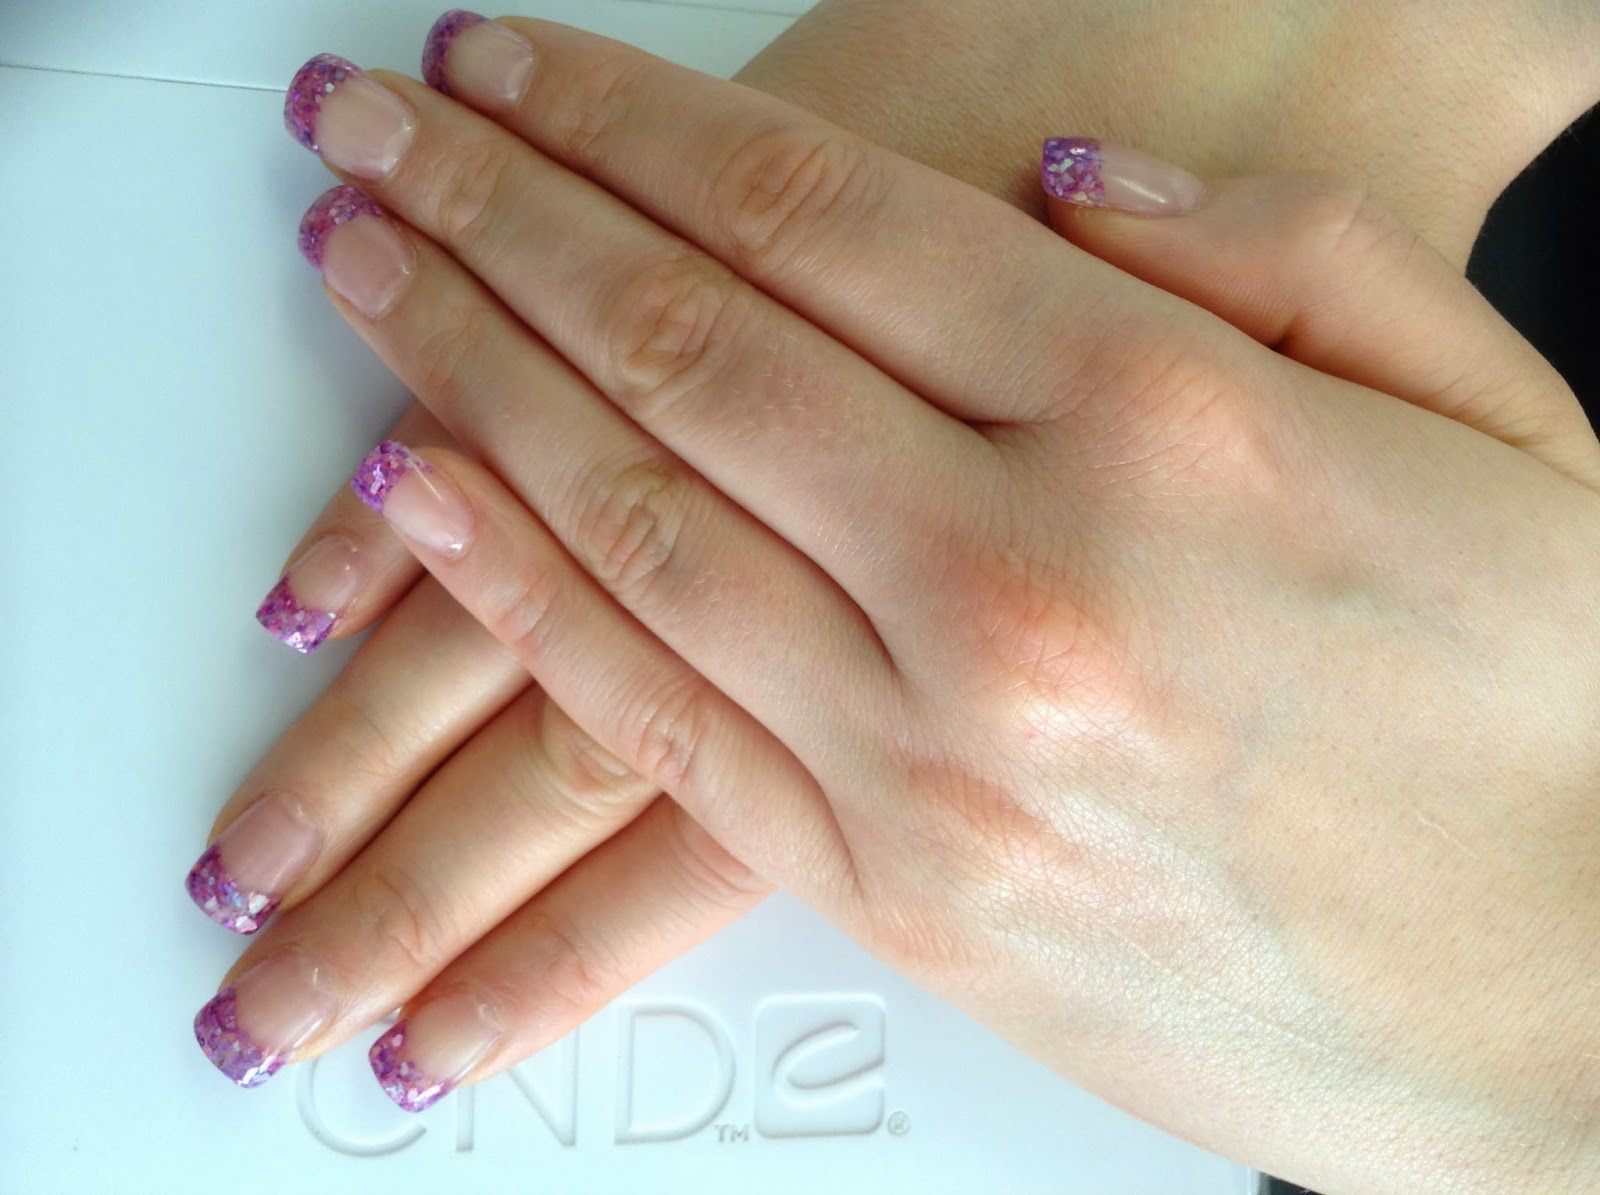 1. Acrylic Nail Art Tip Extensions - wide 10